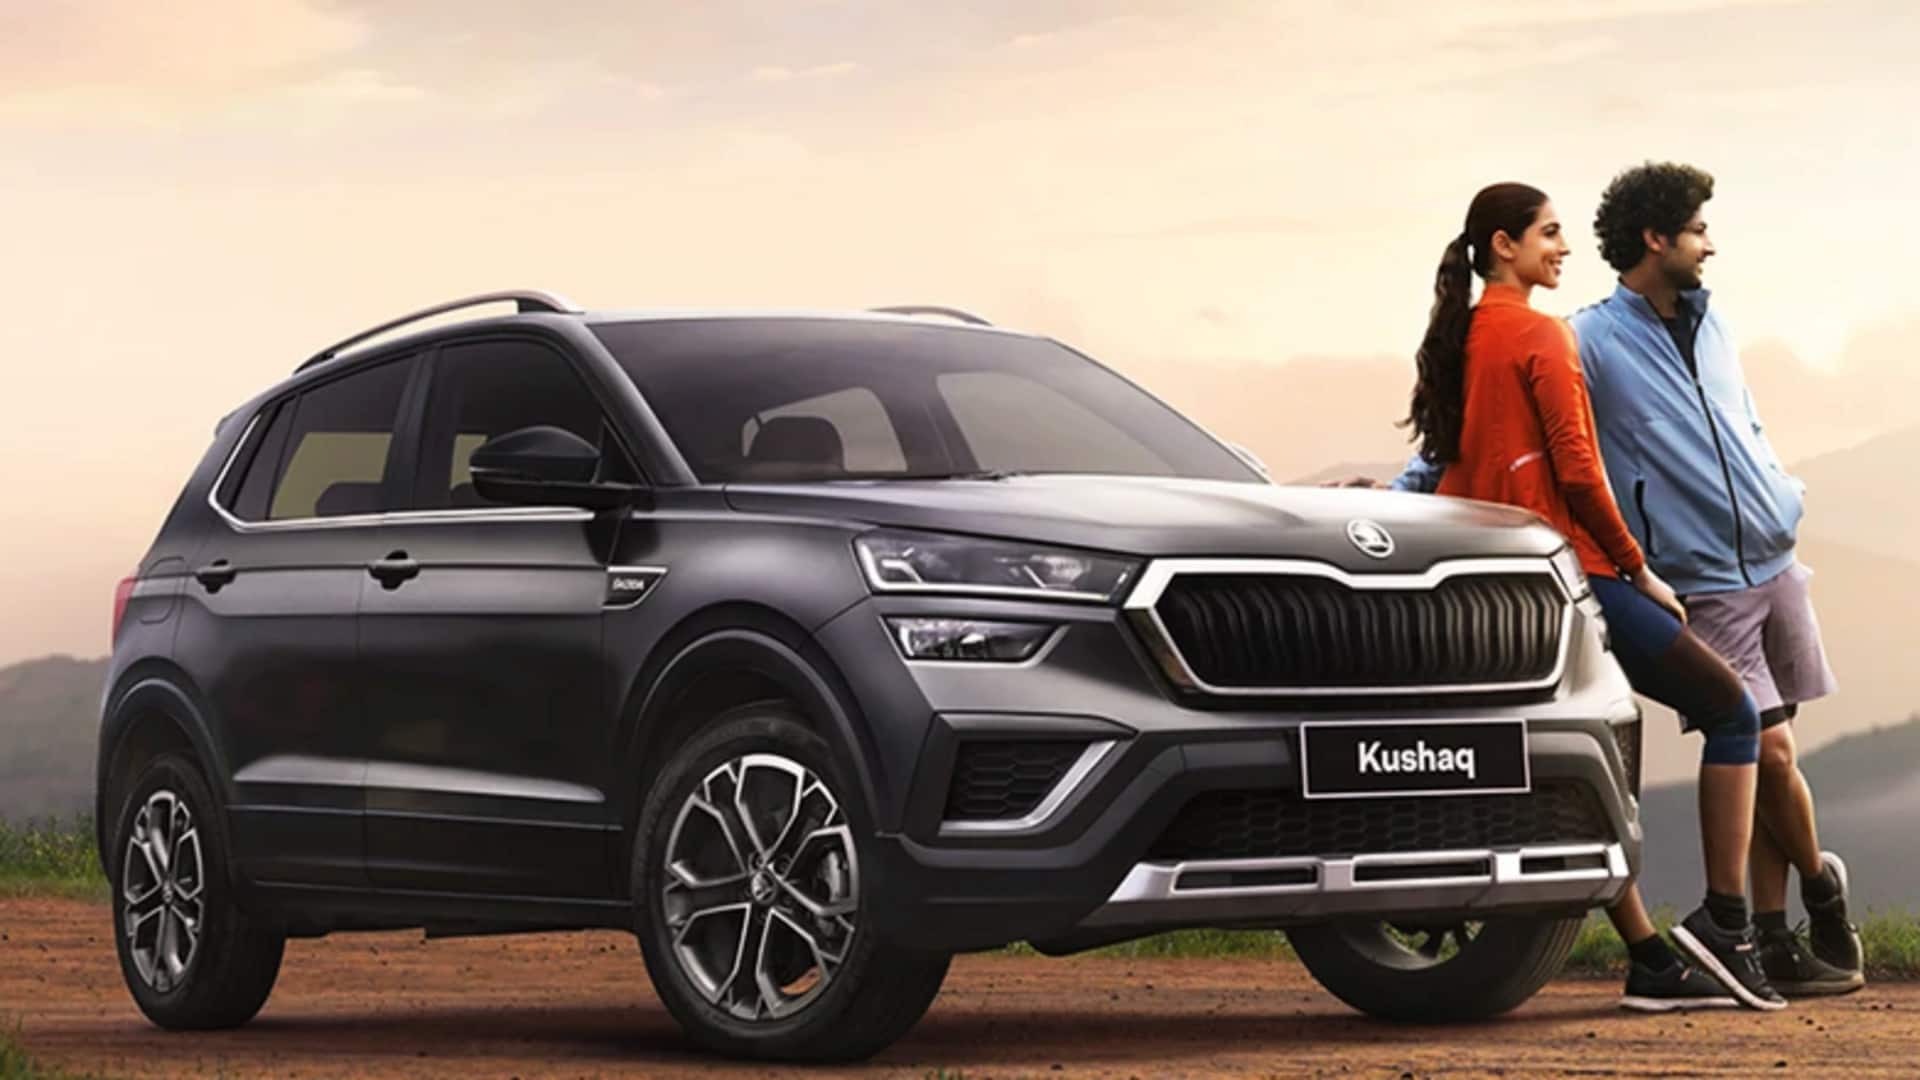 SKODA KUSHAQ Matte, limited to 500 units, launched in India